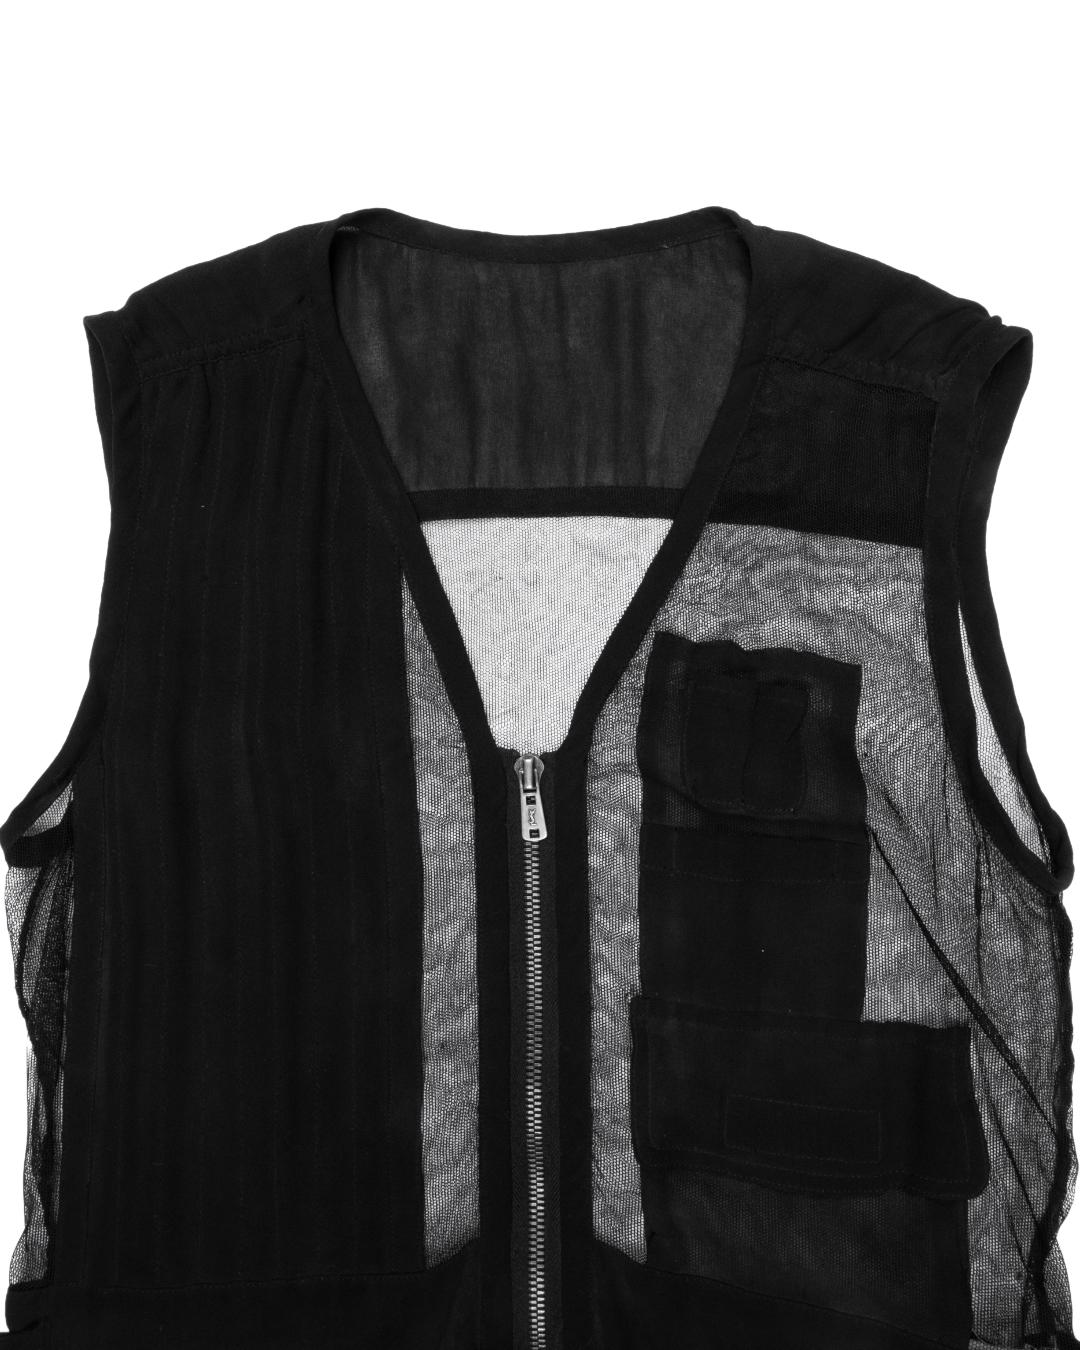 This striking silk vest is crafted from a thin sheet of netted silk, which is accented with applique chiffon cargo pockets. There is a shirring effect on both shoulders, while the center is left unlined and slightly sheer. All the hardware is